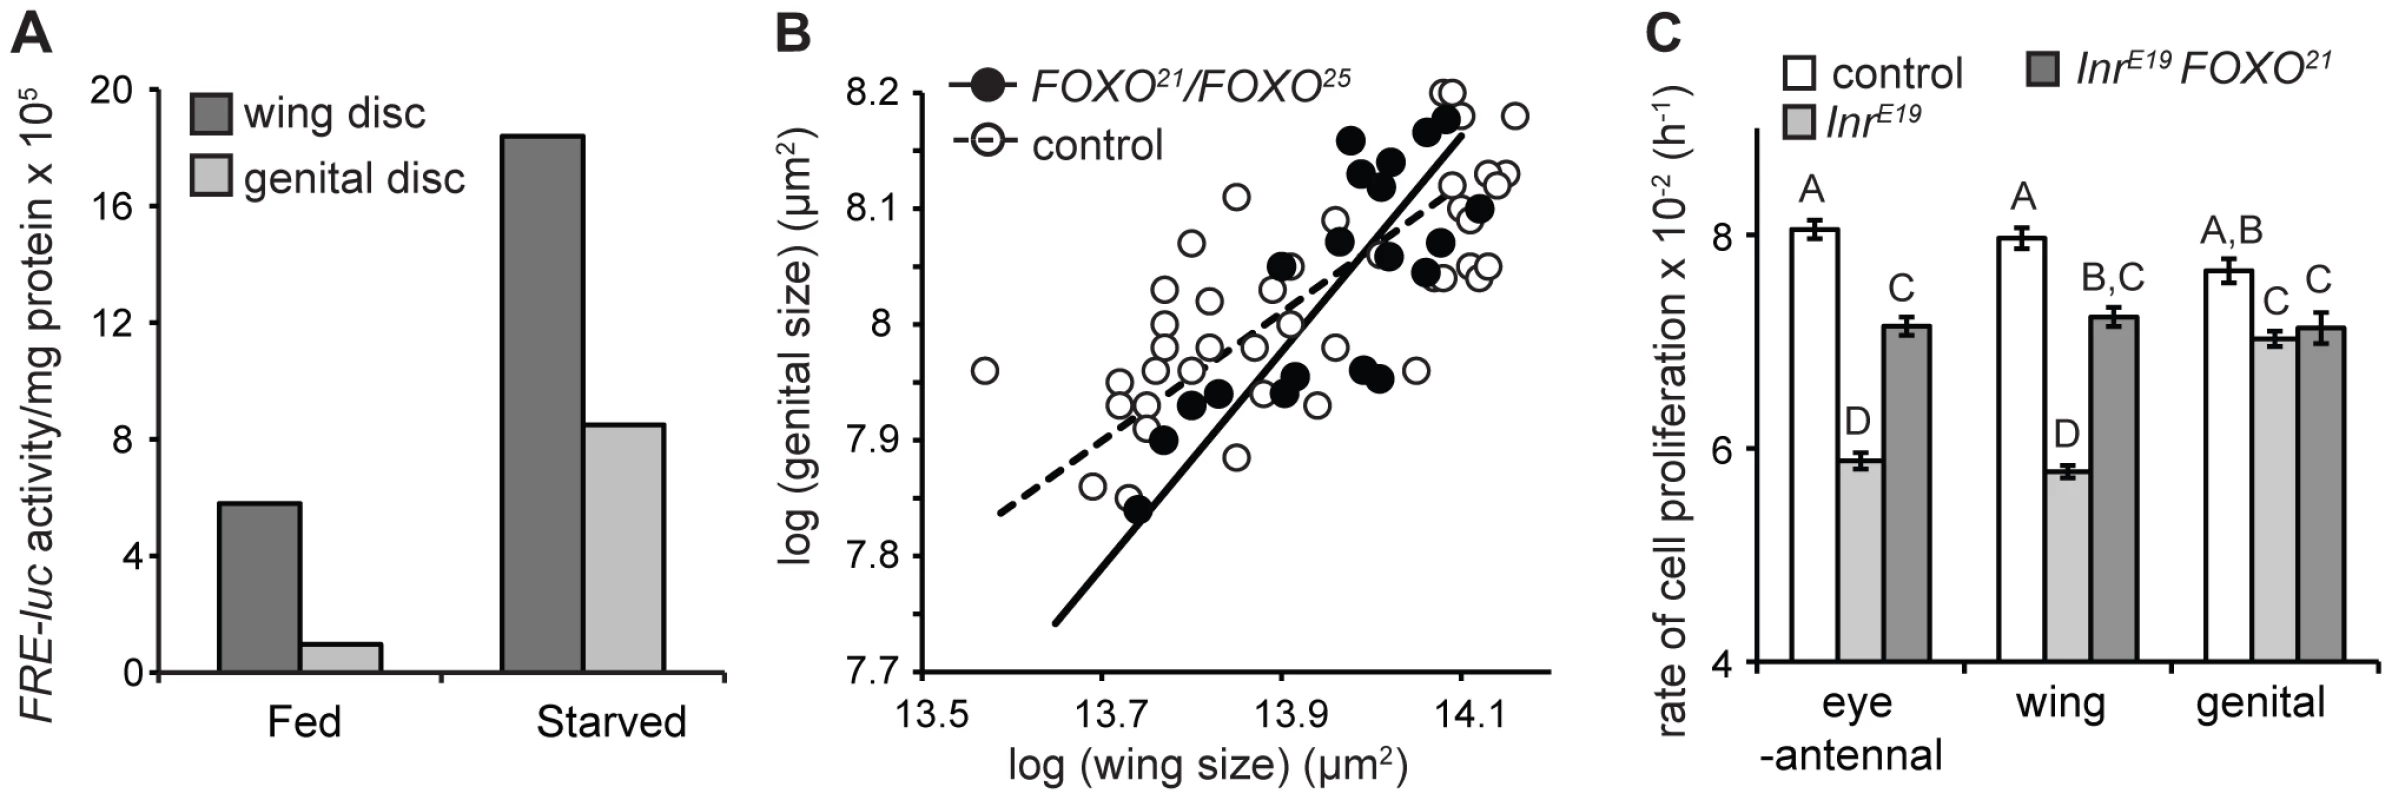 FOXO is necessary to maintain organ-specific nutritional plasticity and insulin sensitivity.